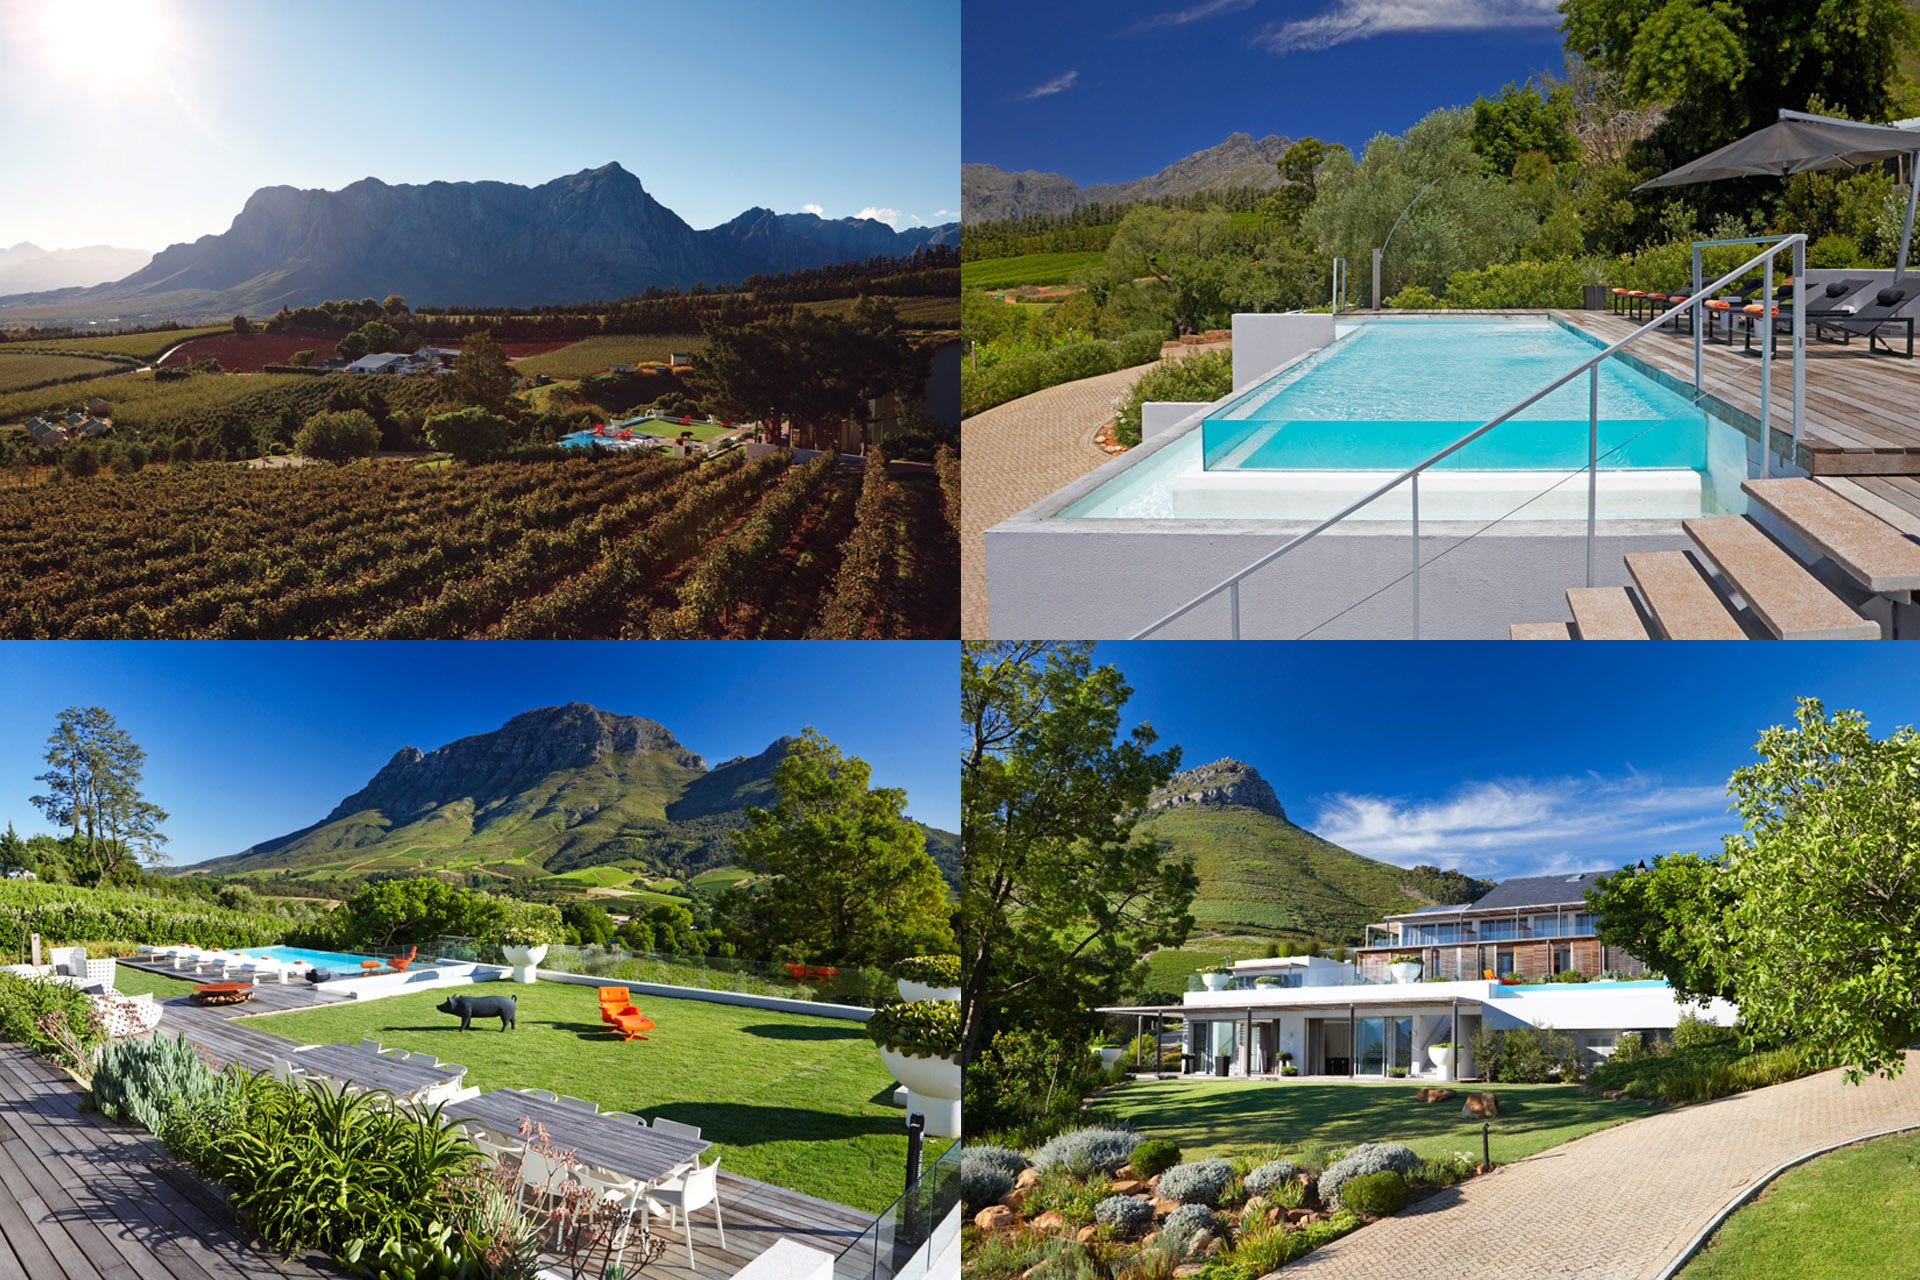 Four photo collage with vineyards, a pool and mountains in the background